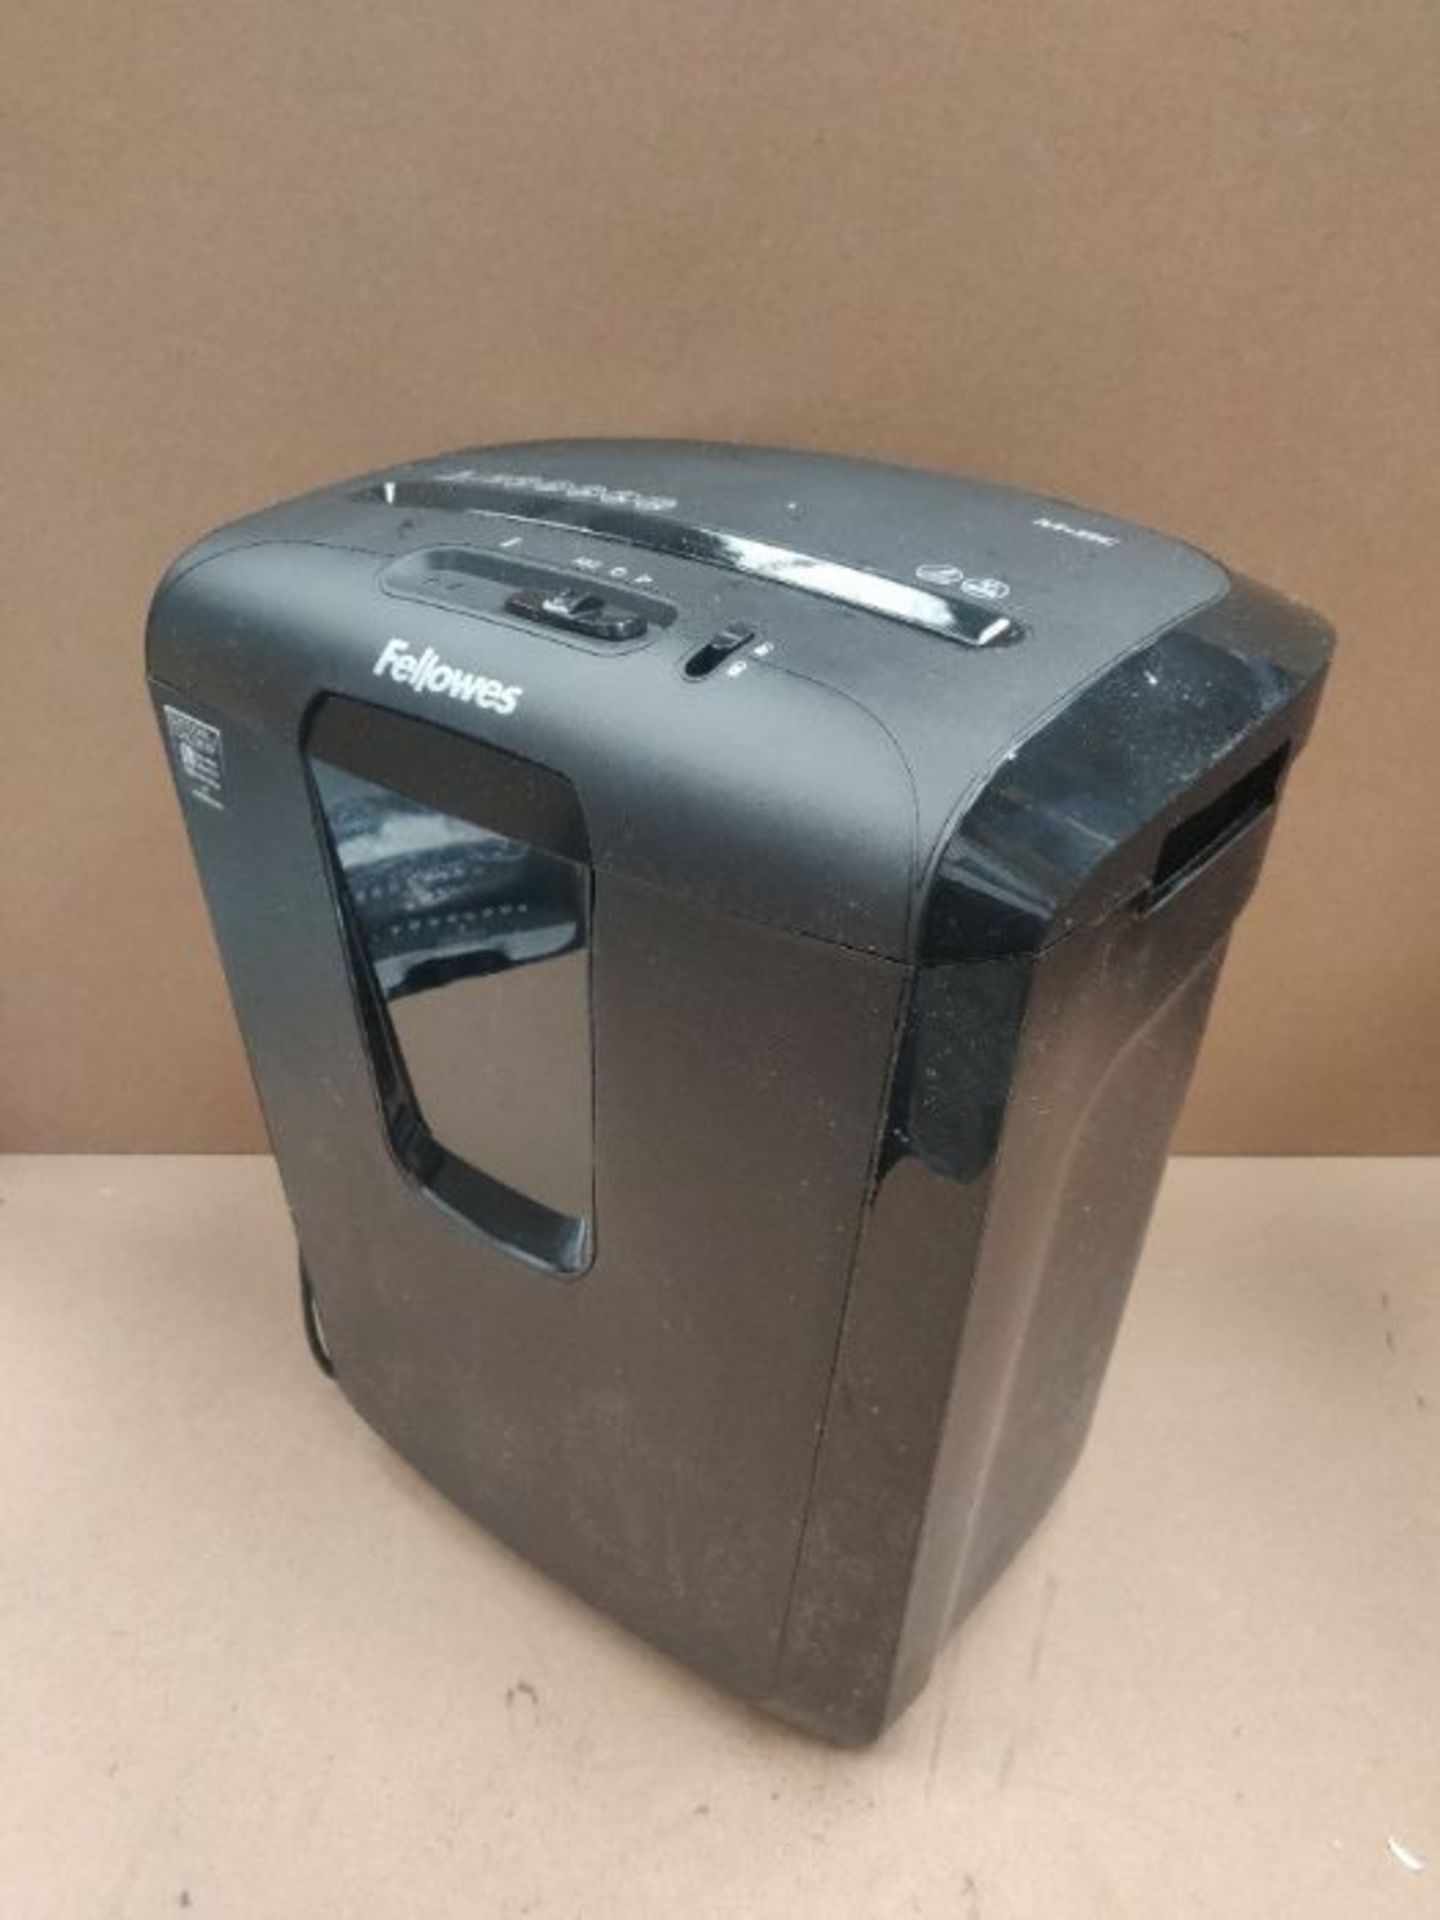 Fellowes Powershred M-8C 8 Sheet Cross Cut Personal Shredder with Safety Lock - Image 2 of 2